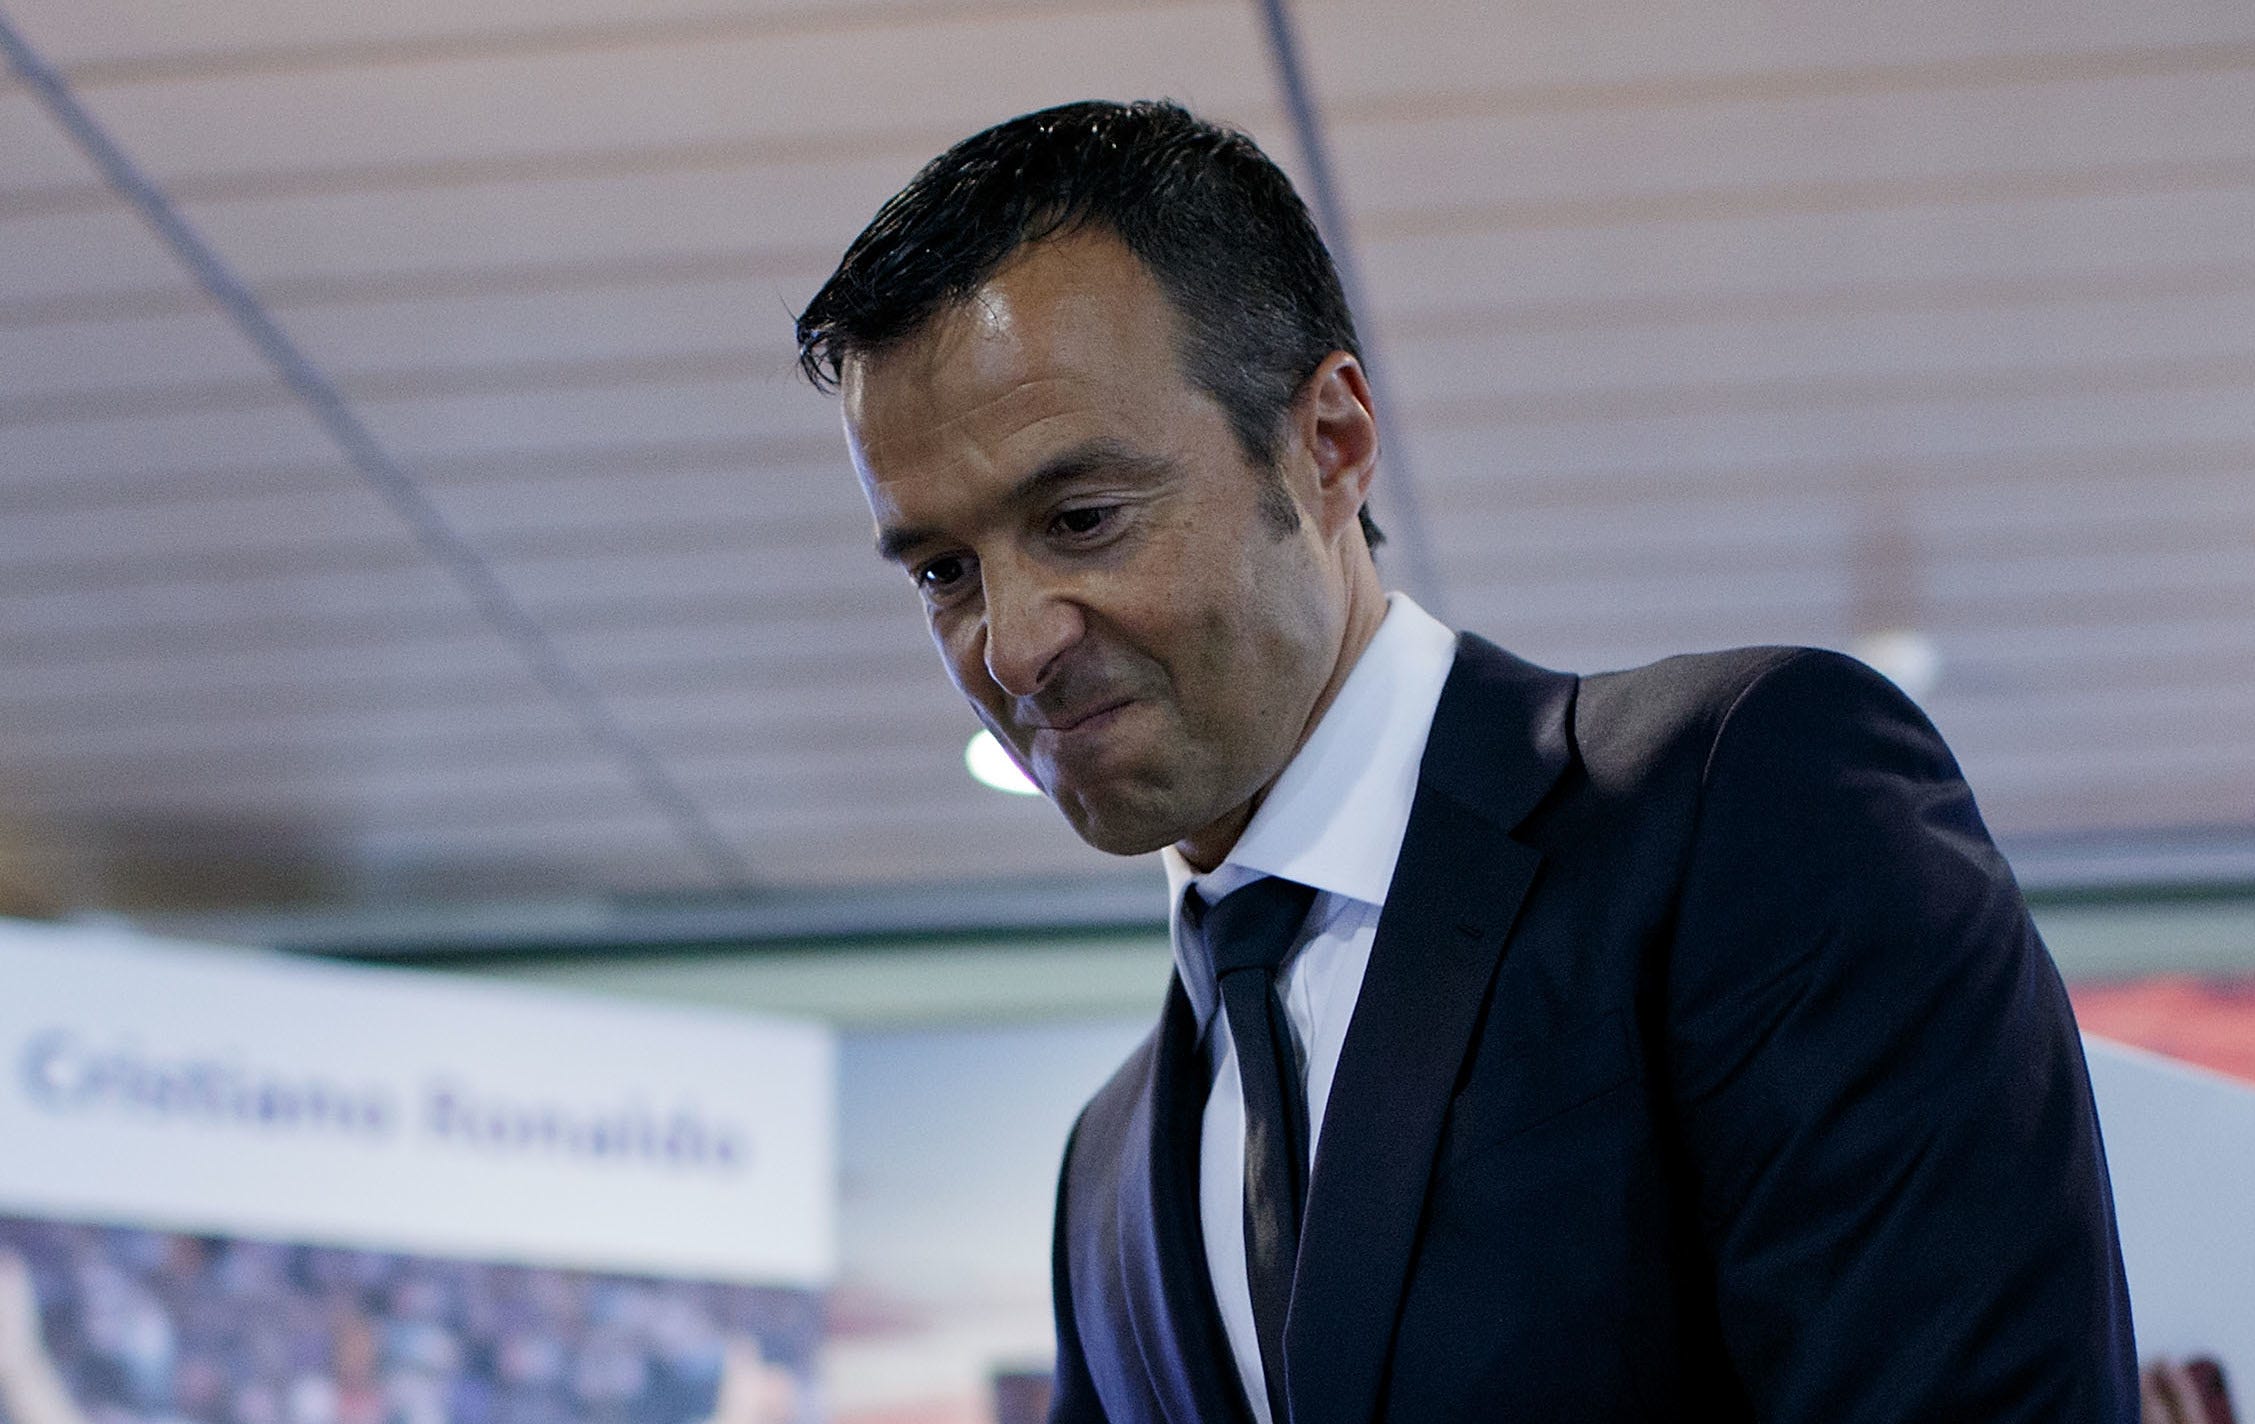 The Milan brass will soon meet Jorge Mendes to discuss a few matters. Rafael Leao’s extension will be the main topic of conversation.